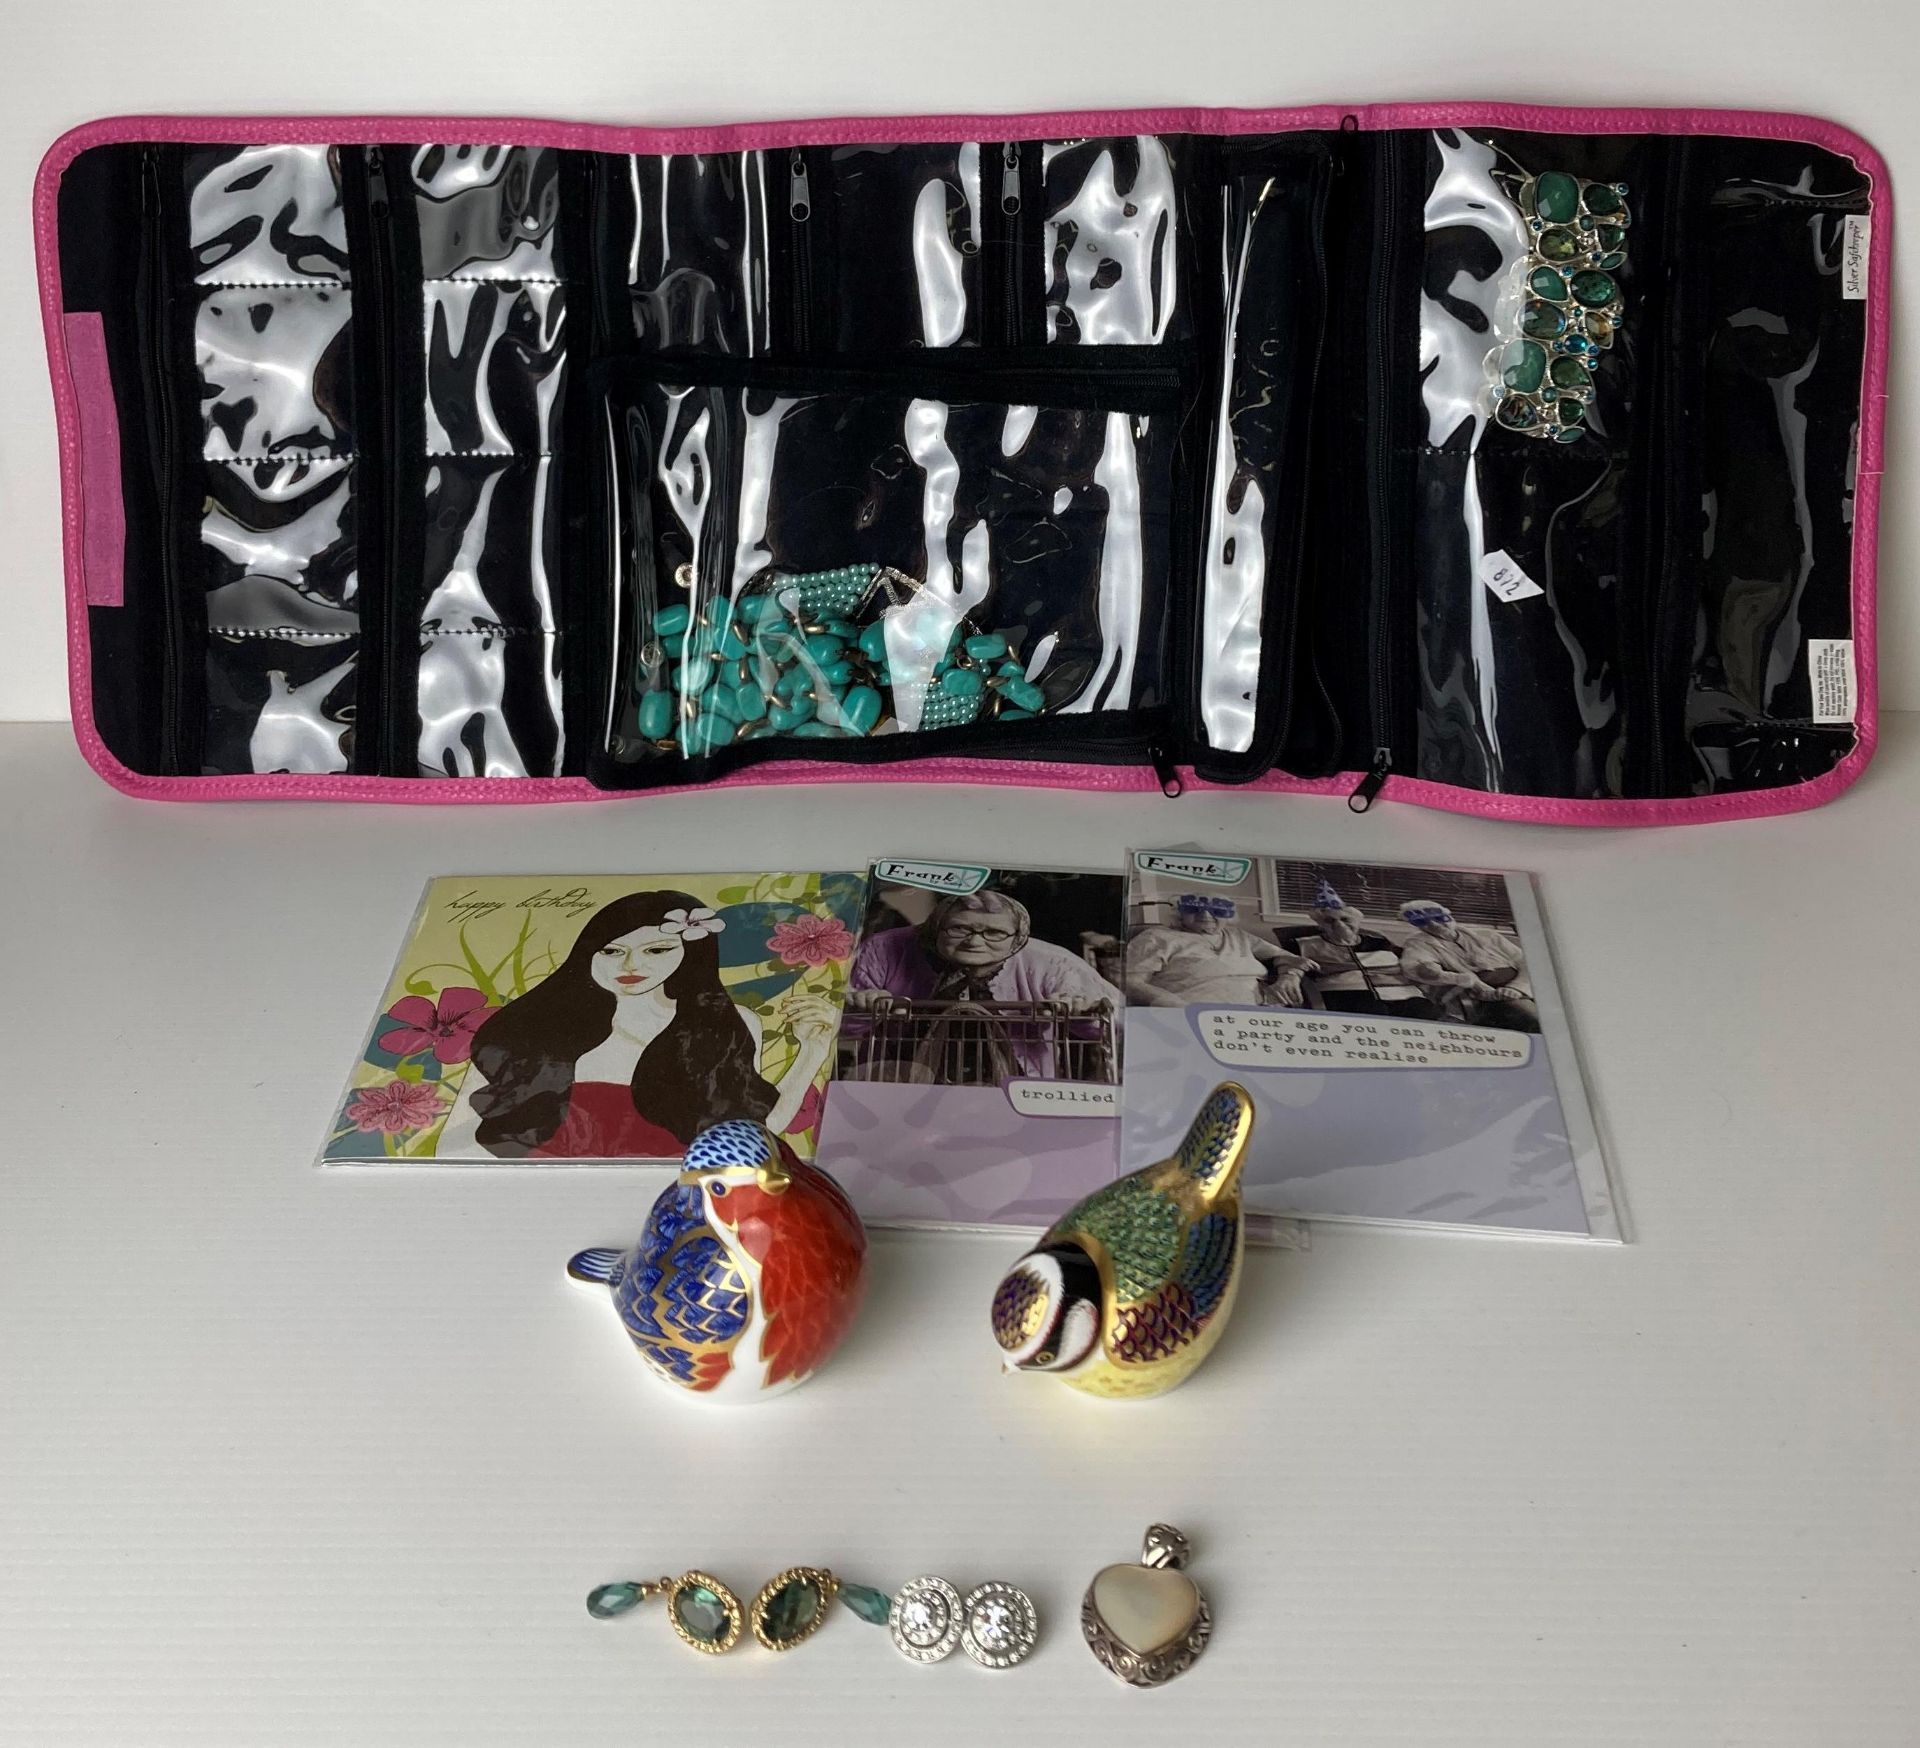 Contents to box and jewellery bag - six pieces of jewellery including a silver (.